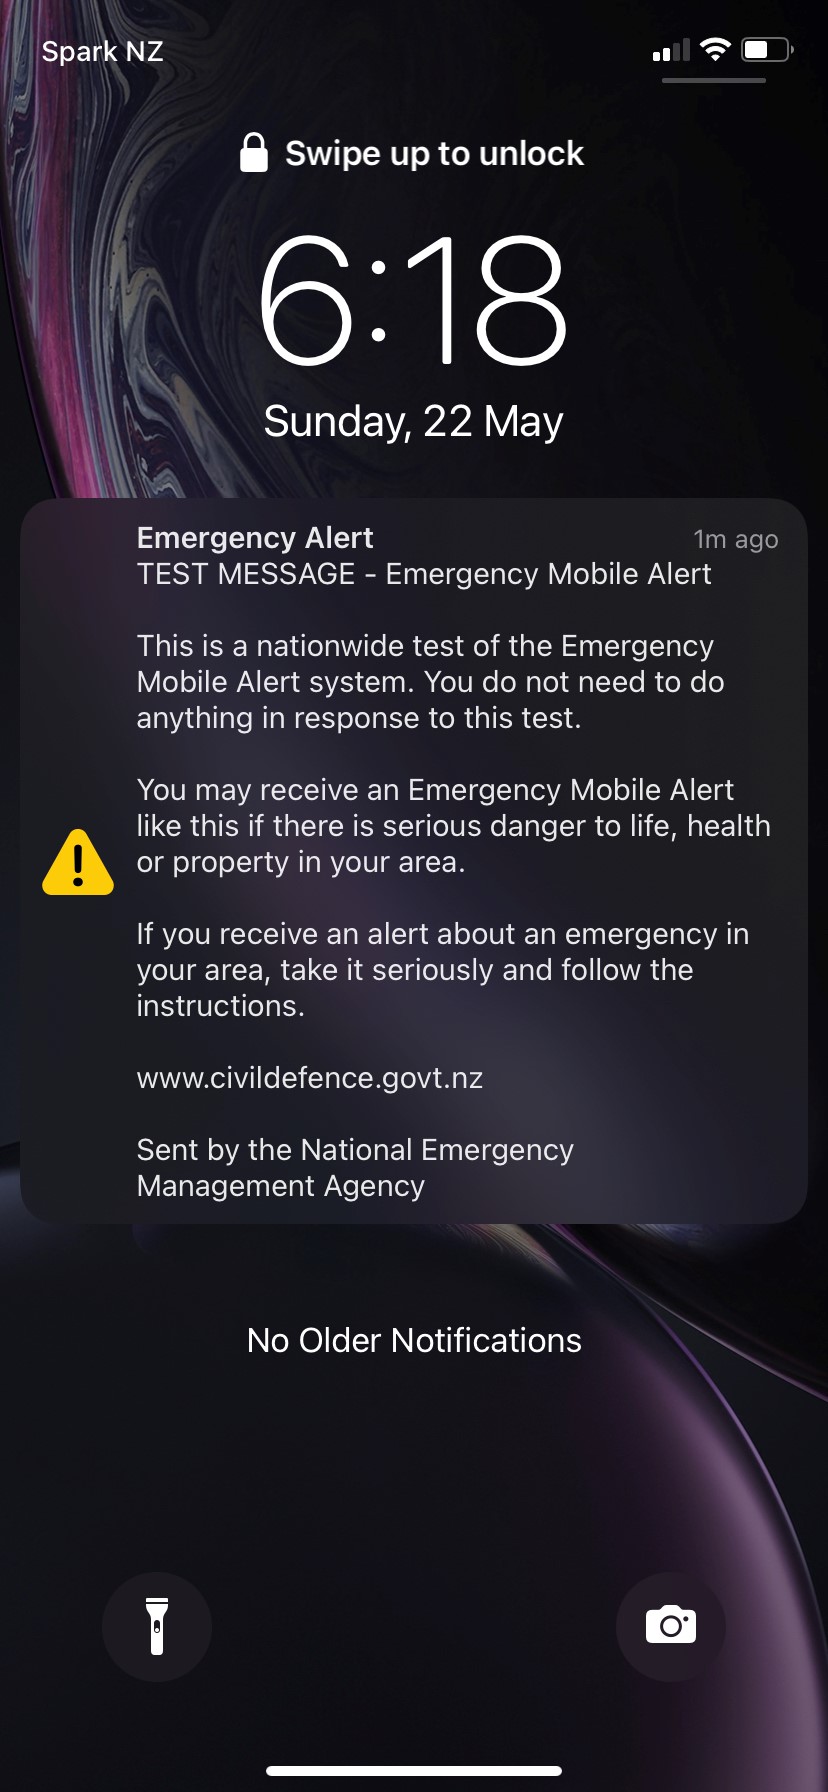 Home » National Emergency Management Agency